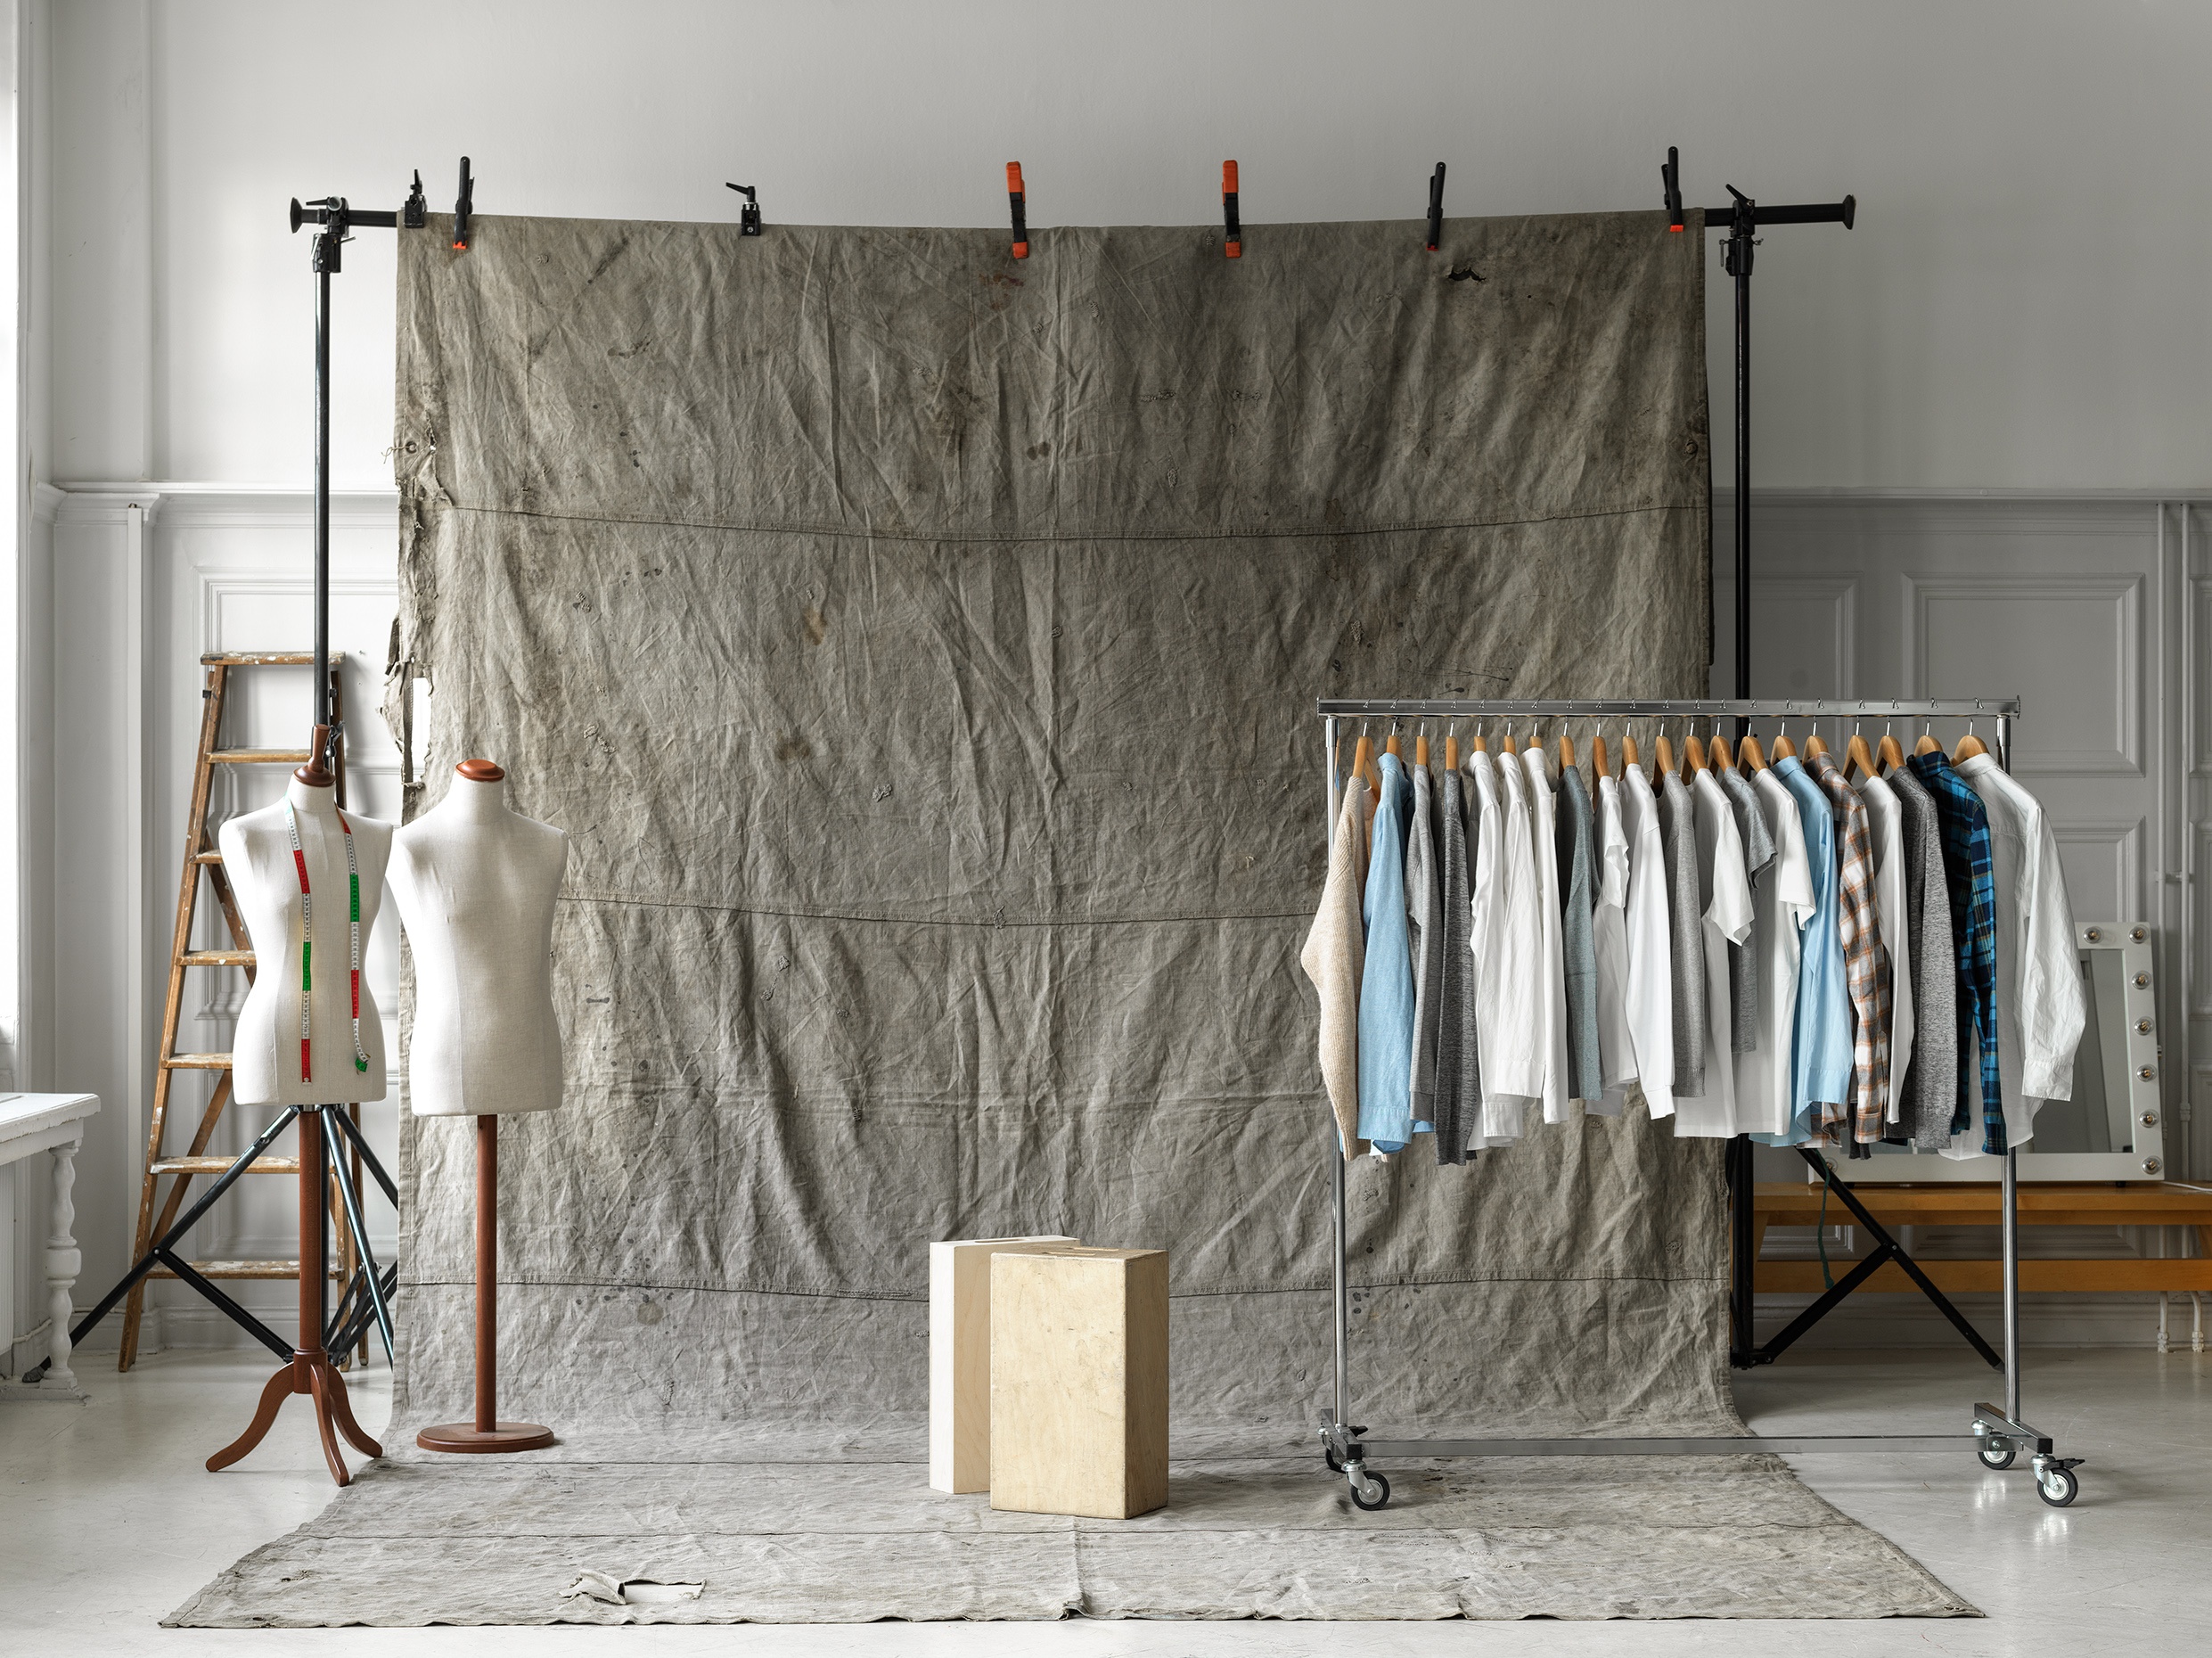 Clothing in a studio